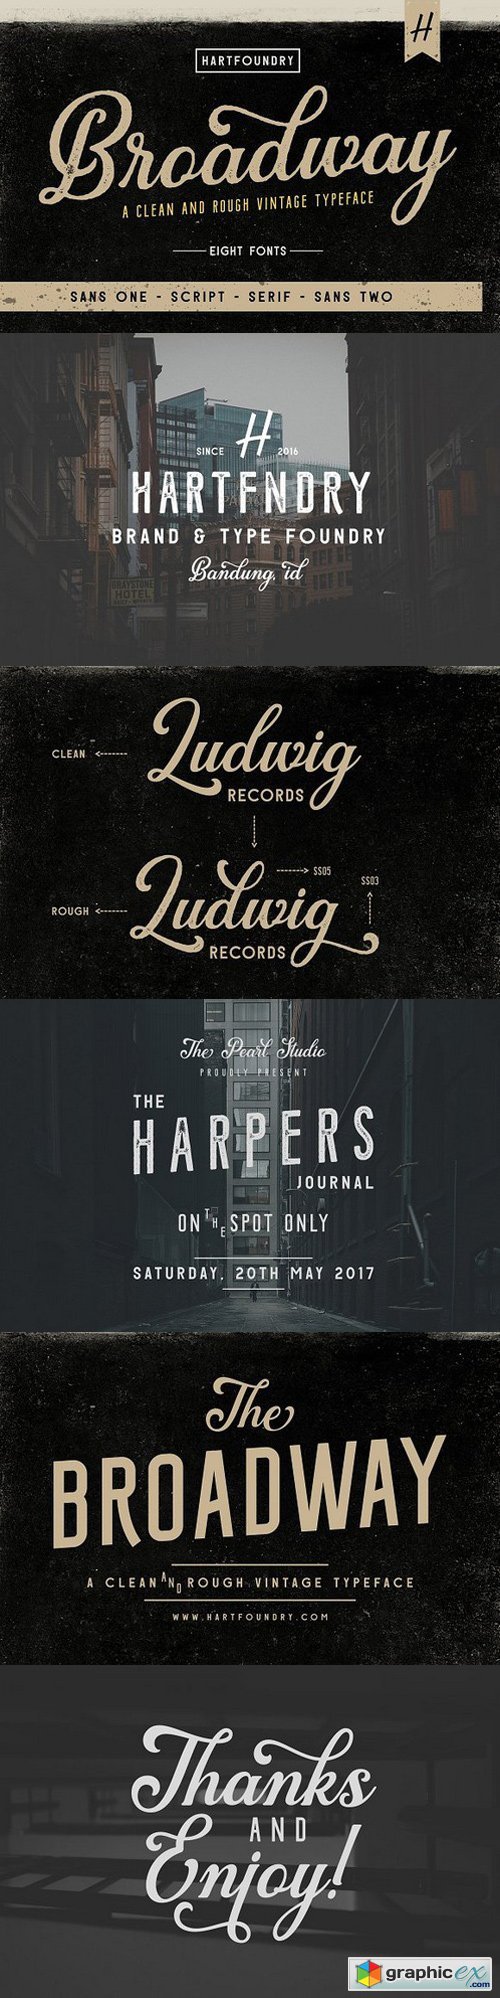 broadway font download for photoshop